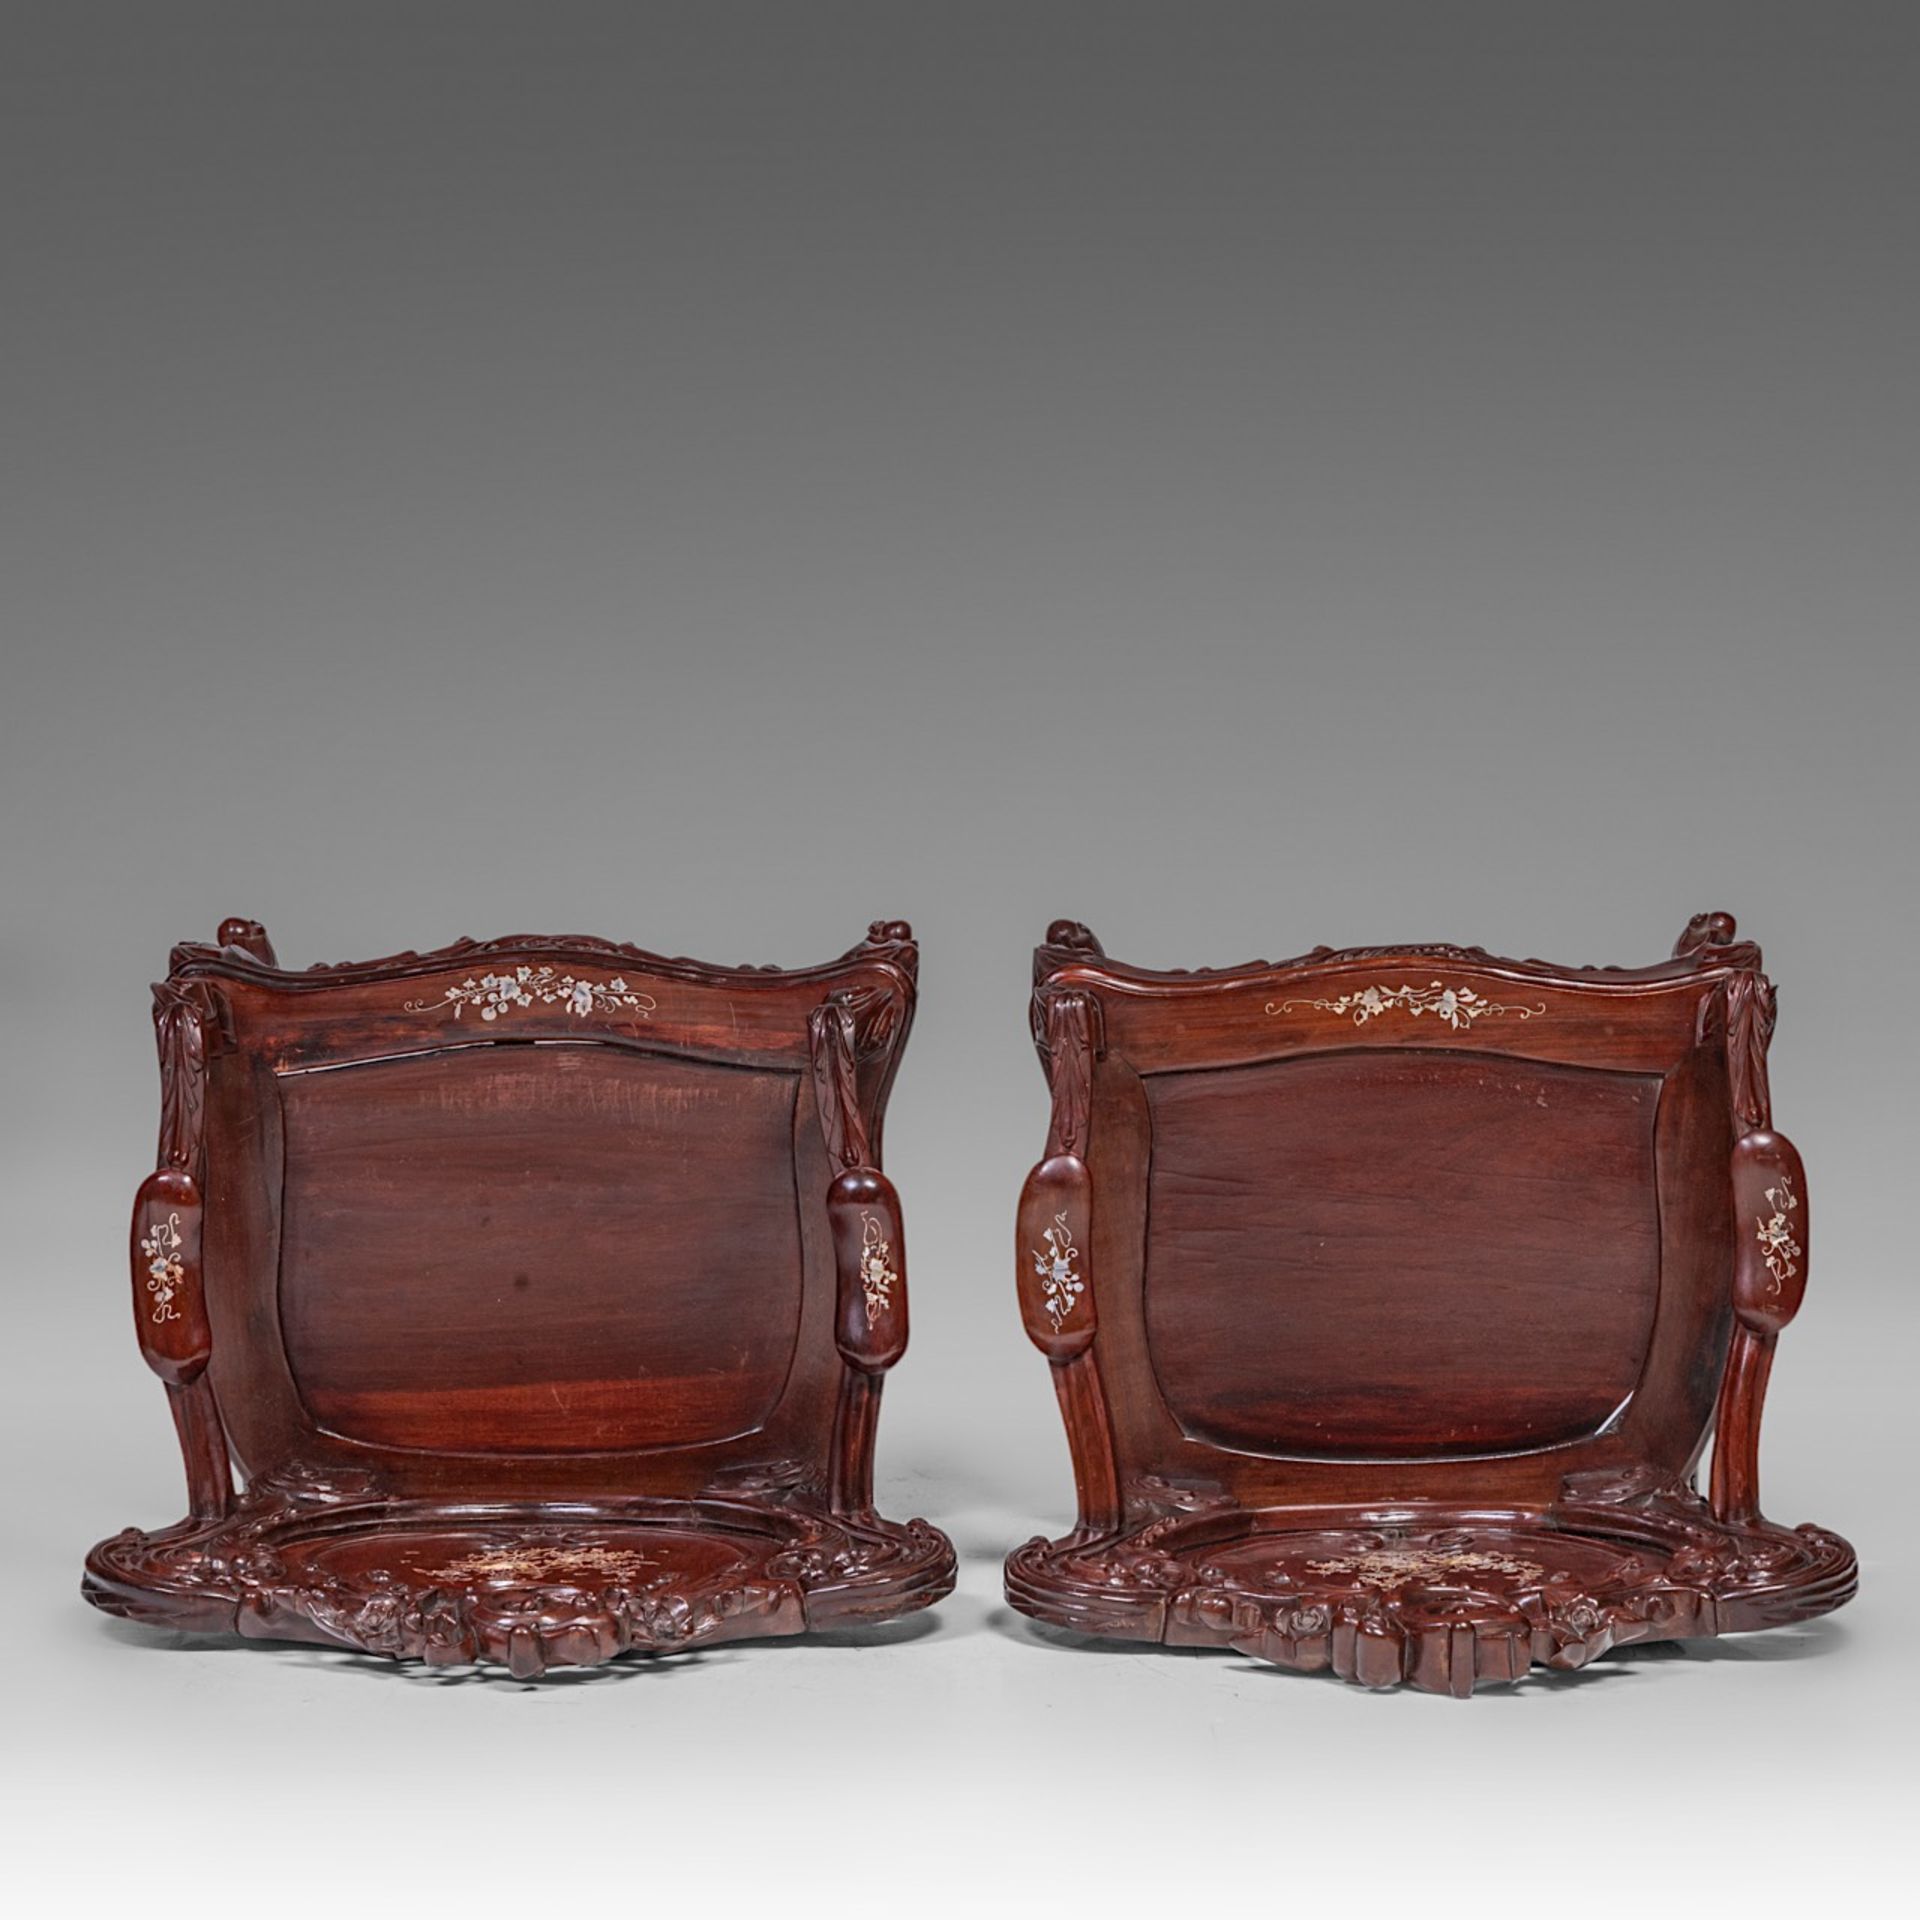 An Anglo-Chinese settee and two chairs, H settee 132 - H chair 108 cm - Image 11 of 24